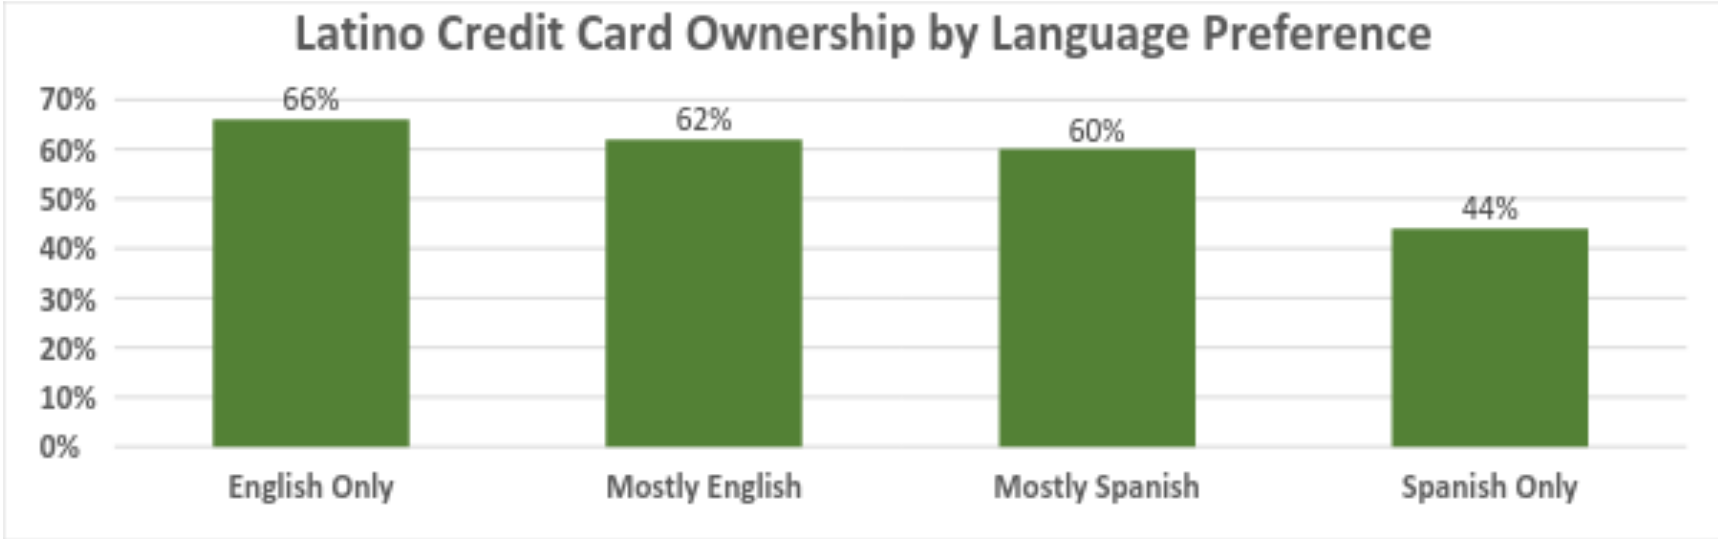 Credit_cards_latinos_second_image.png